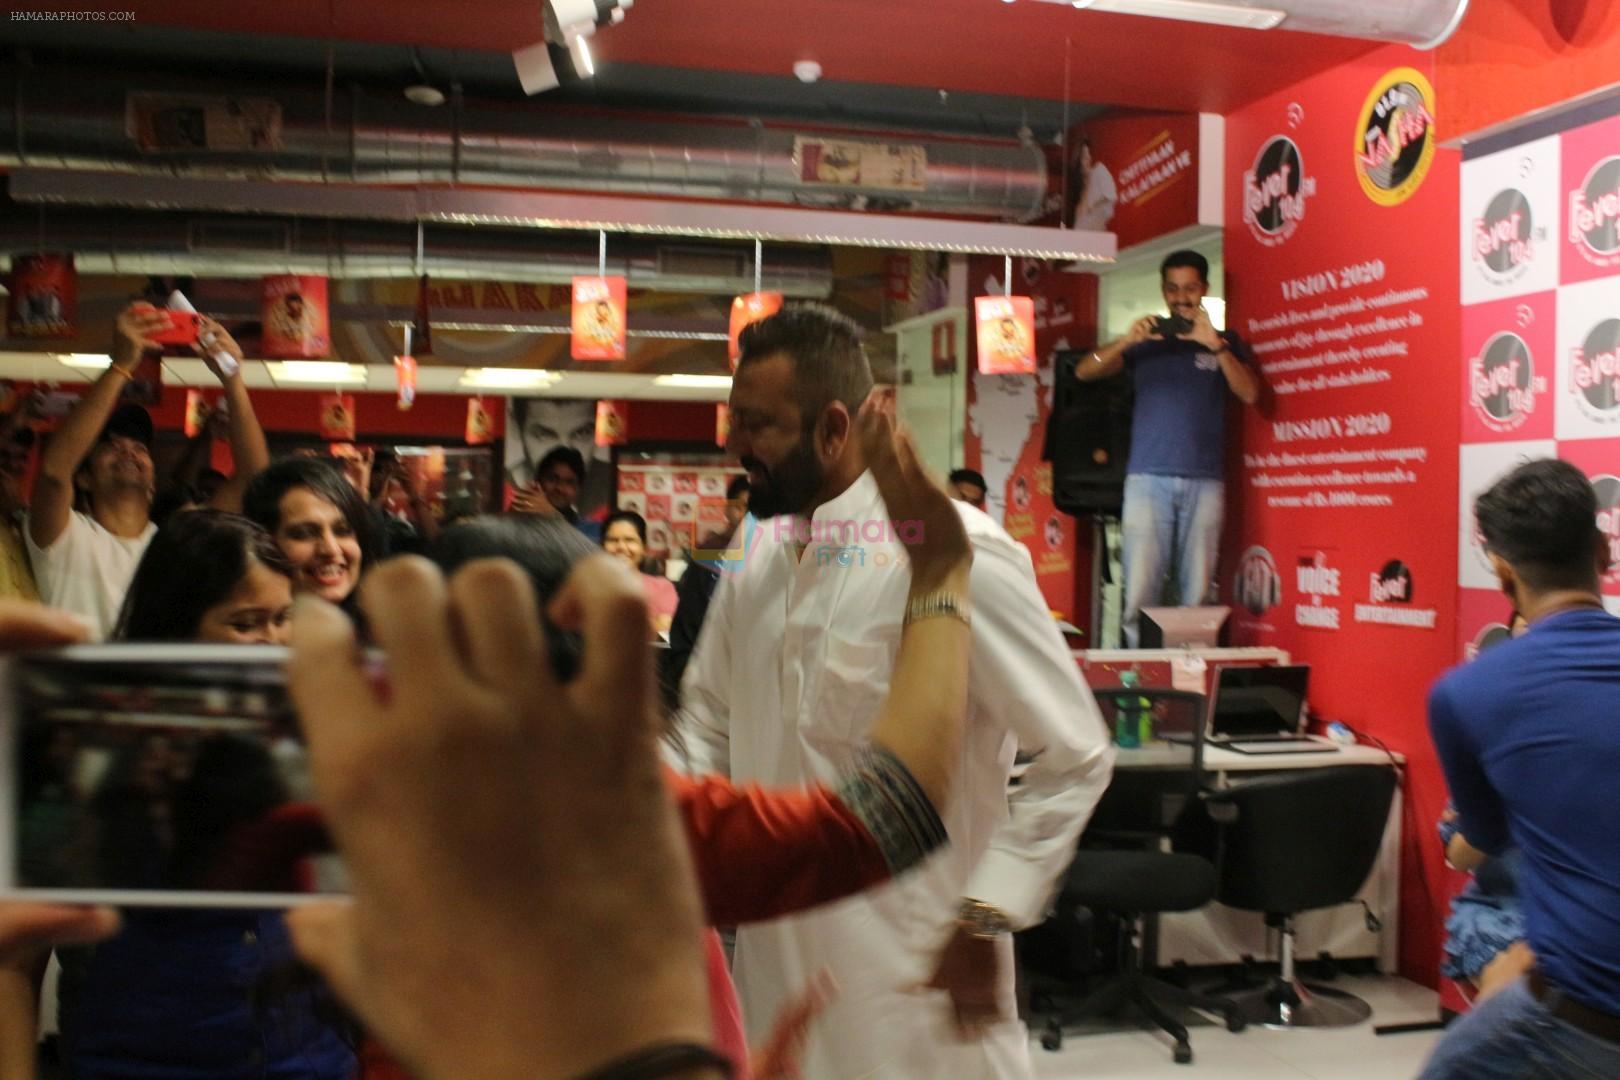 Sanjay Dutt Spotted At FEVER 104 FM For Promoting Film Bhoomi on 28th Aug 2017